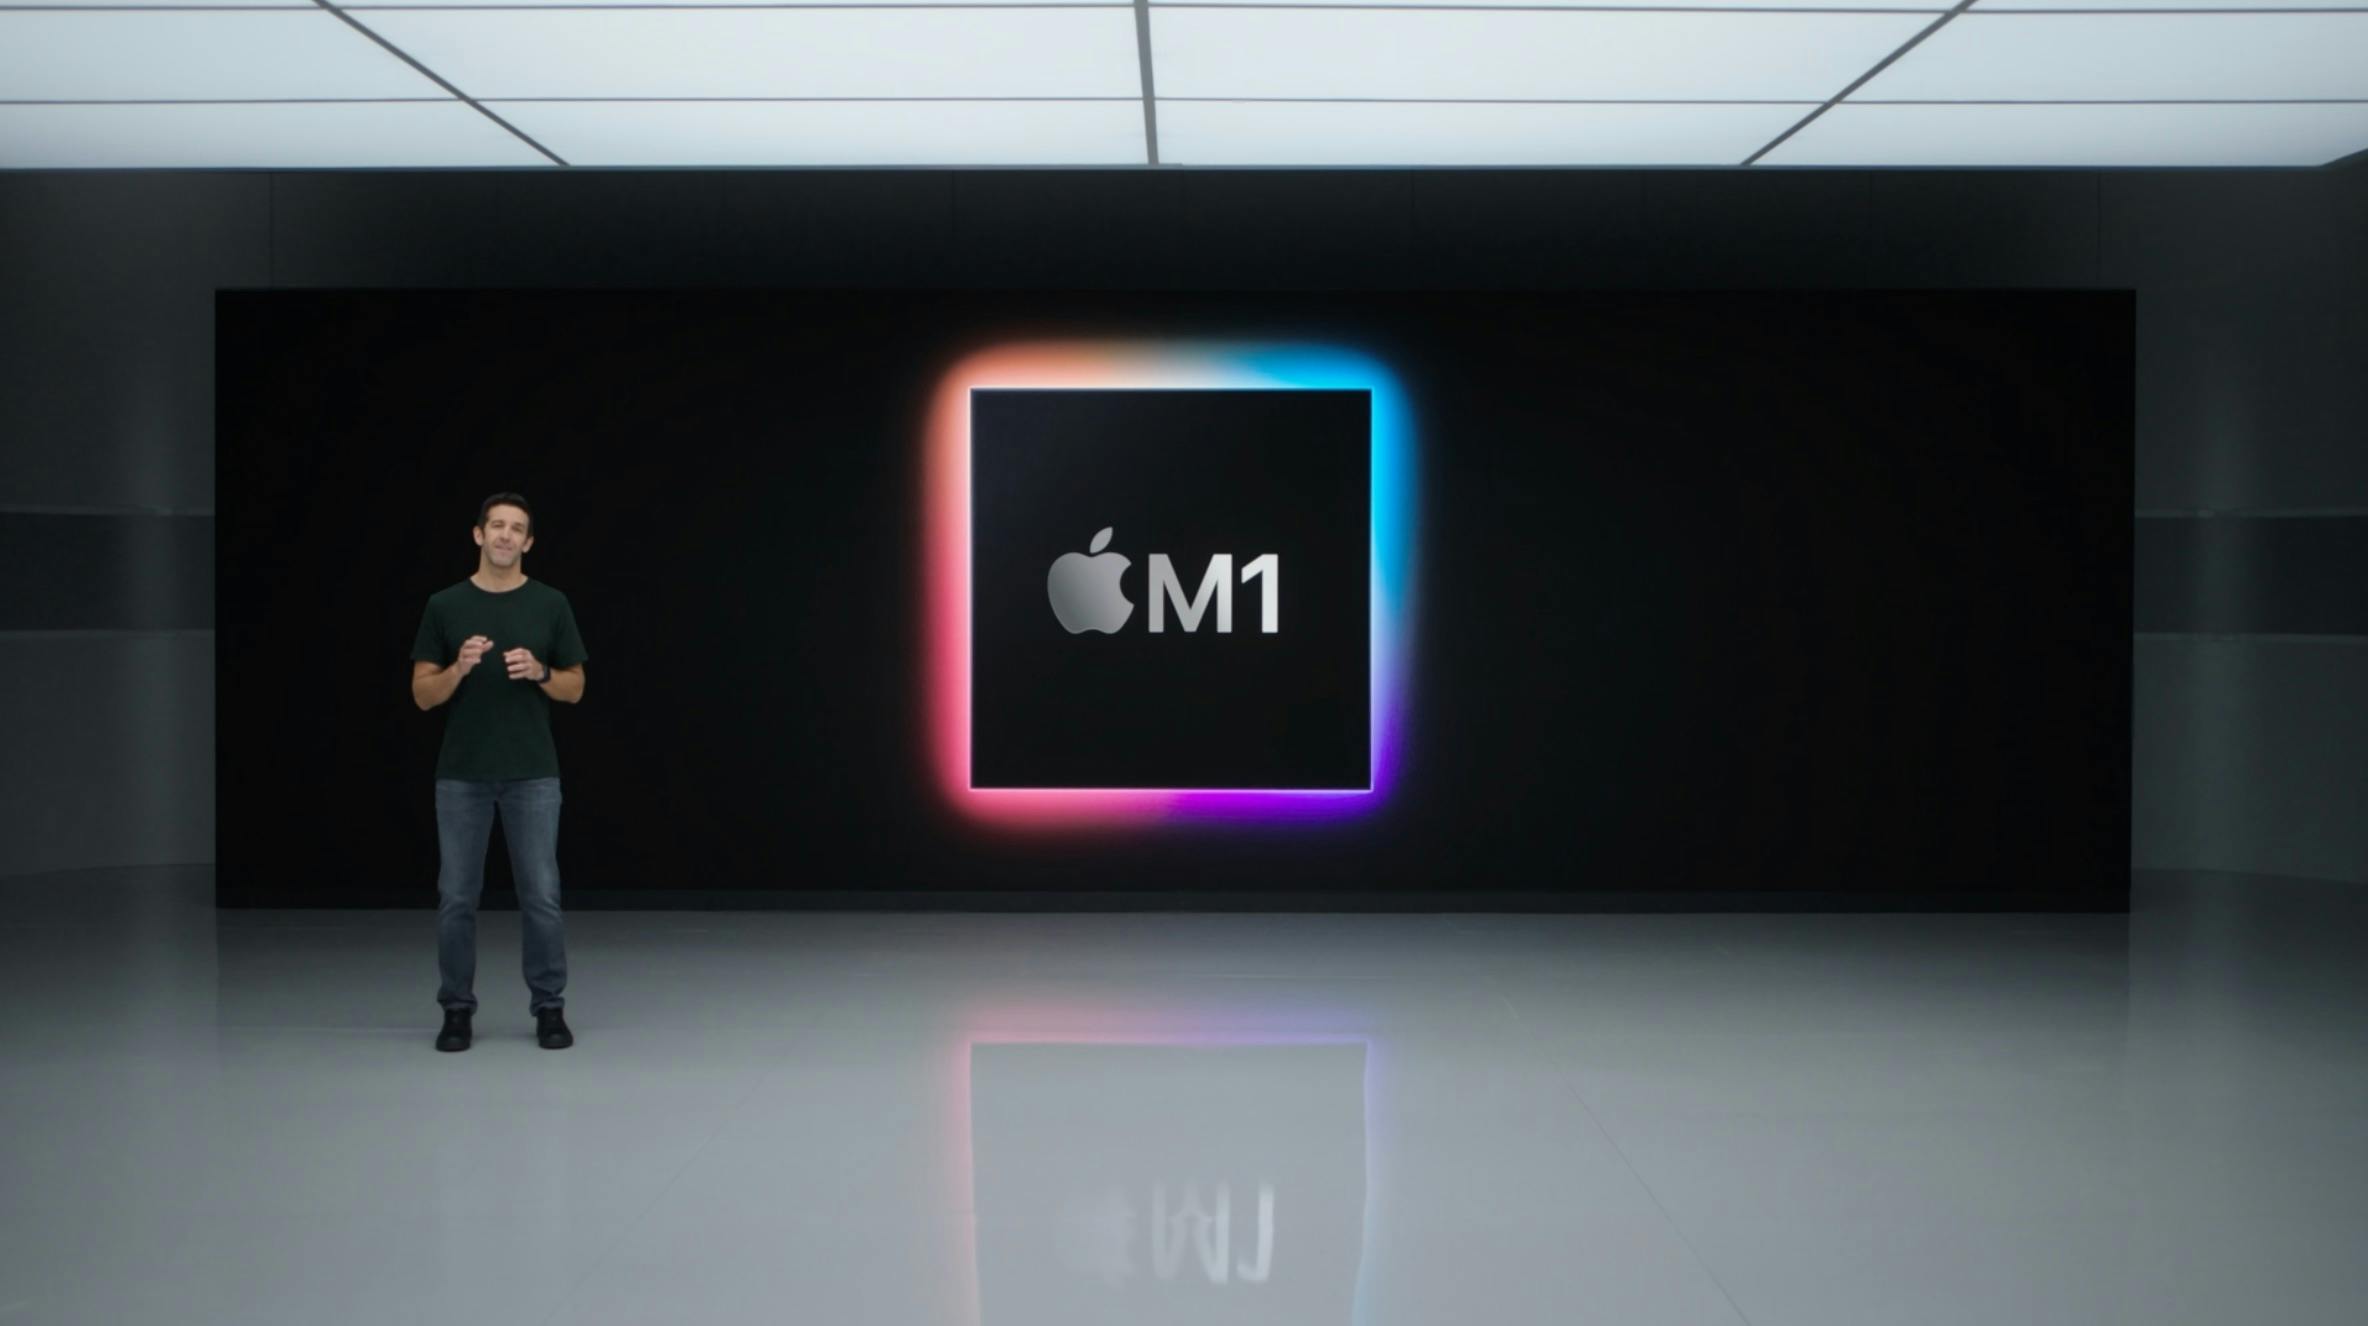 Here is everything you need to know about Apples M1 Chip